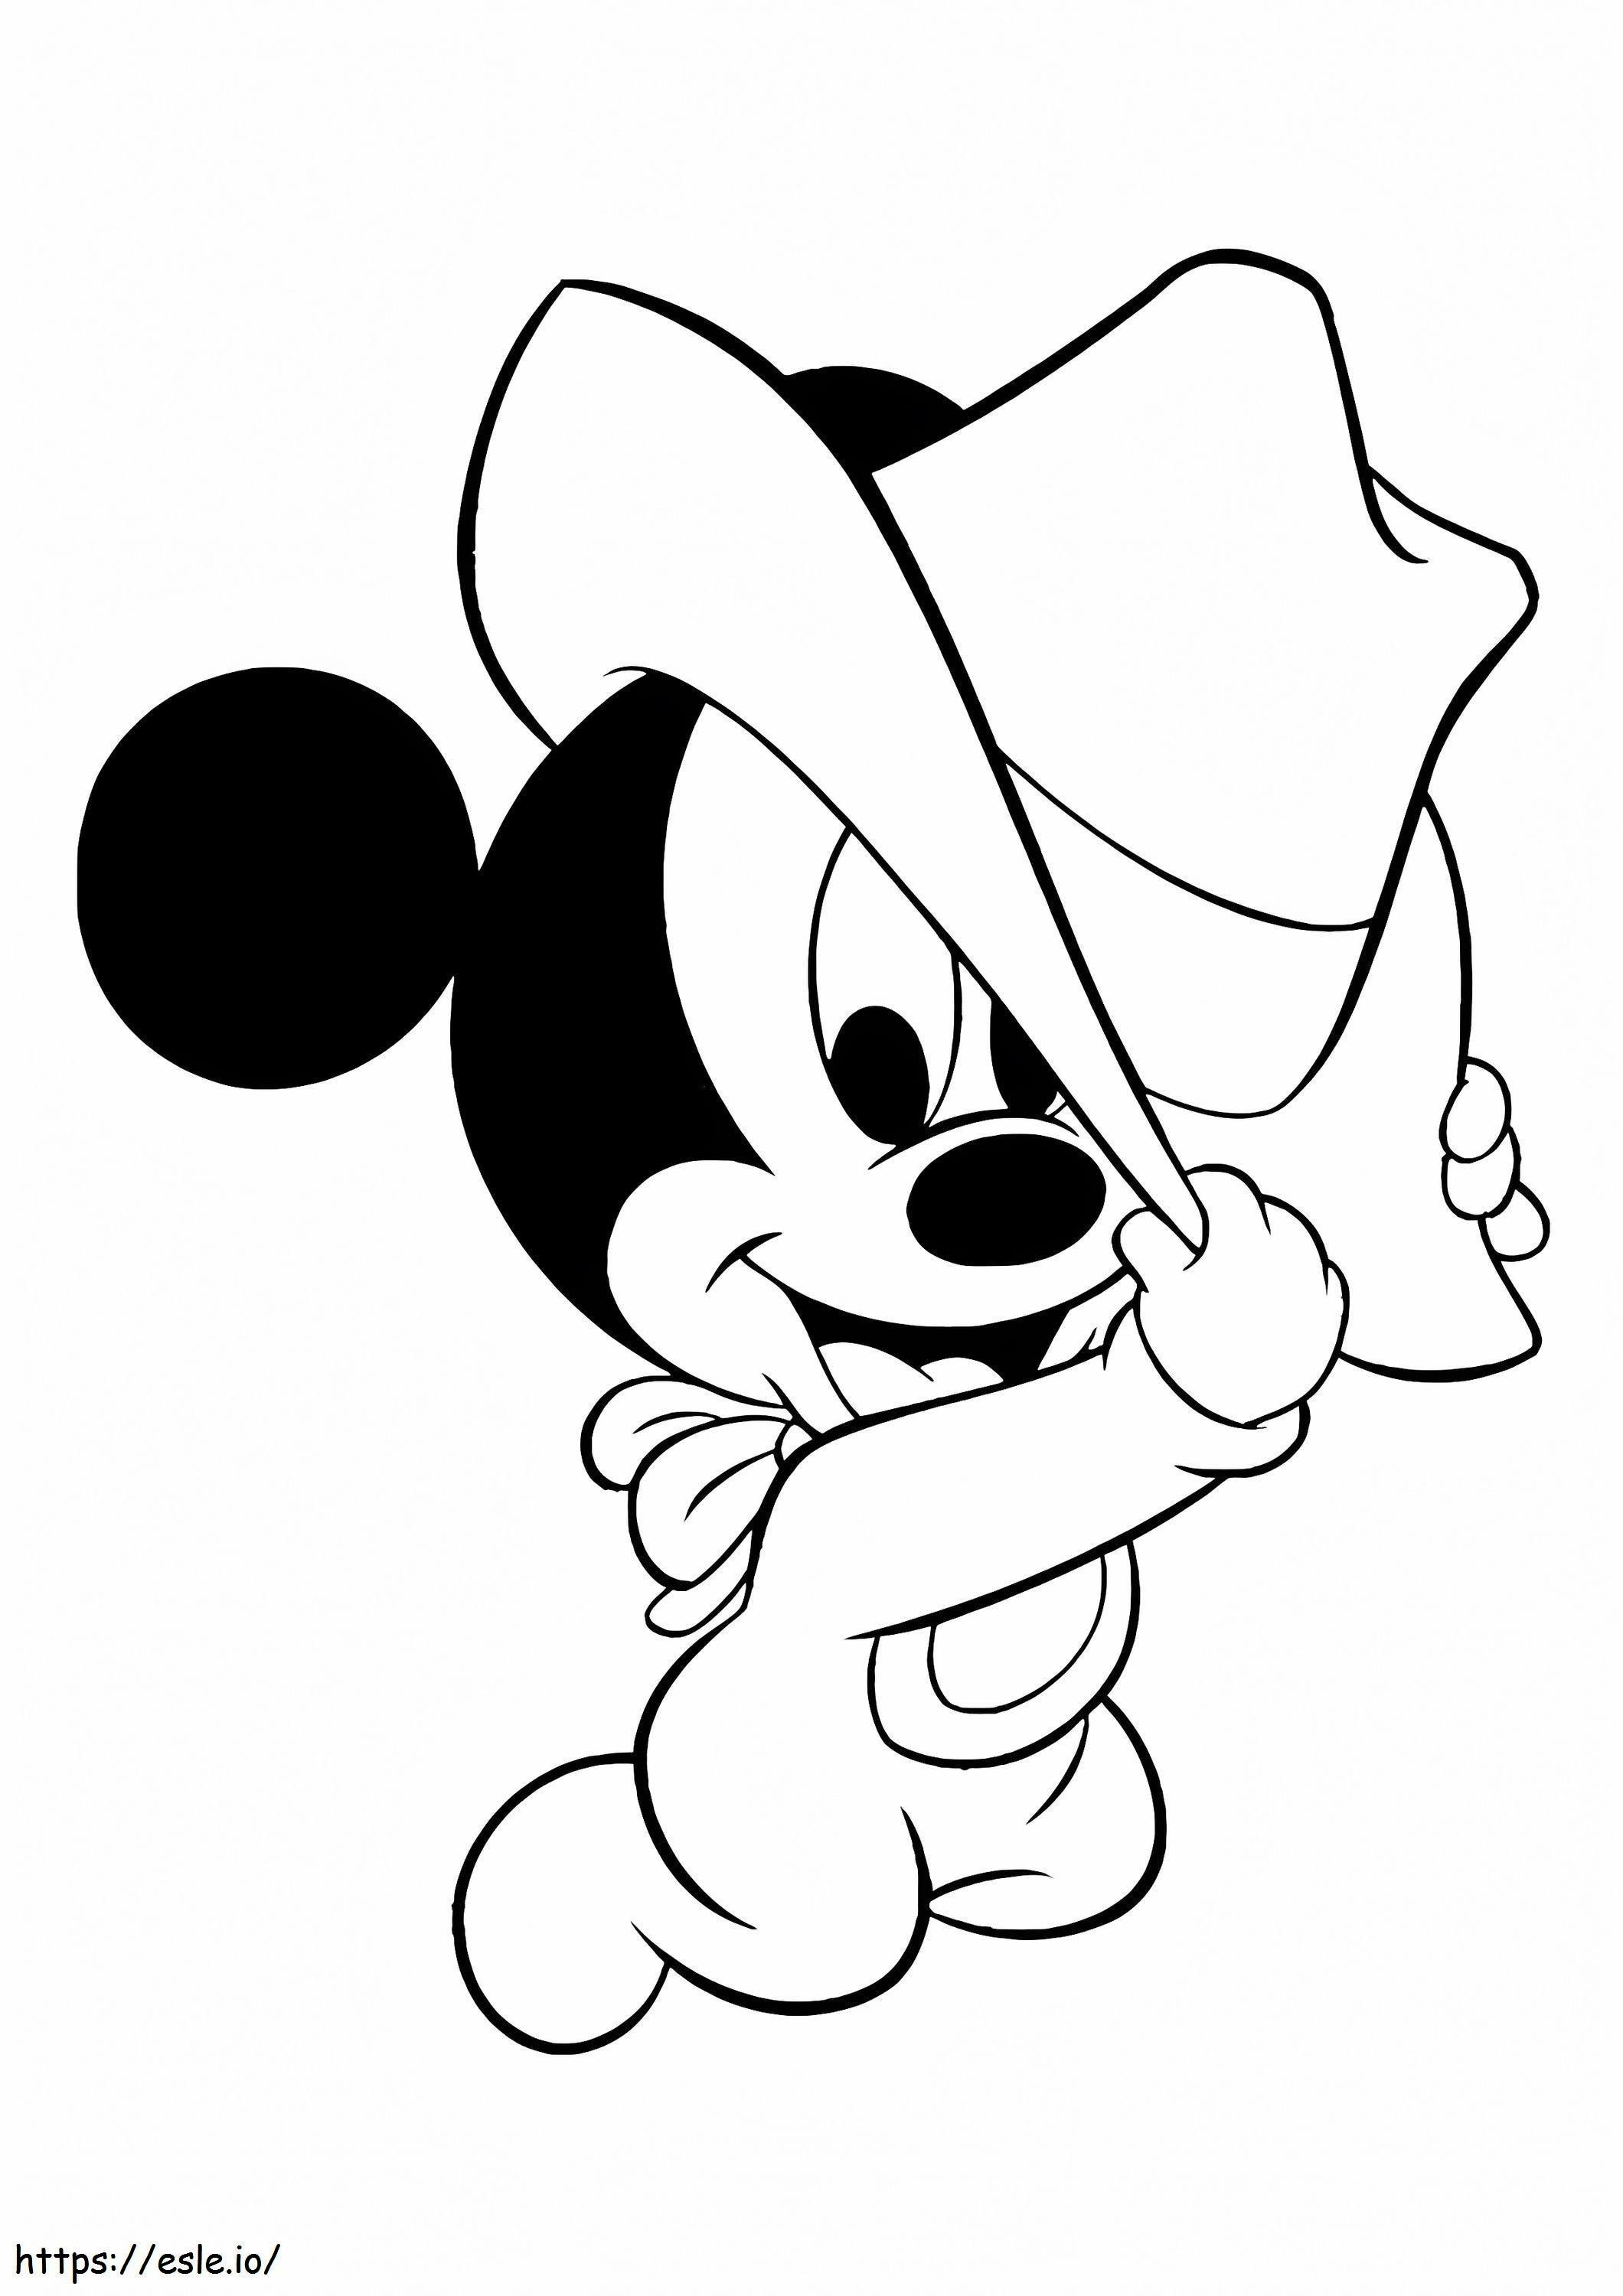 1528099194 The Cowboy Mickey Mouse A4 coloring page